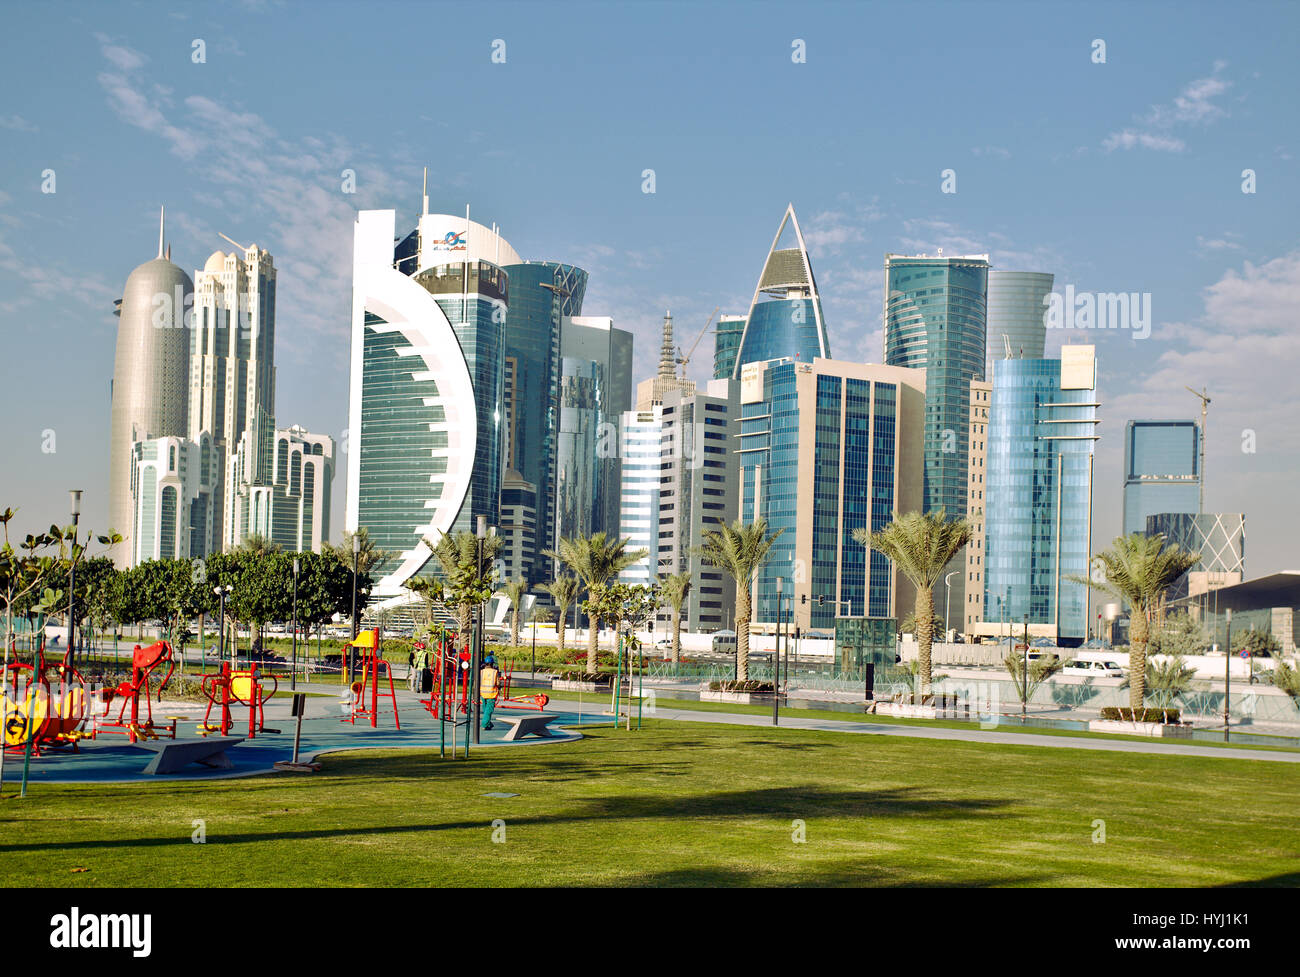 DOHA, QATAR - FEBRUARY 17, 2016: The high-rise district of Doha, seen from the recently completed Hotel Park, with a children's playground in the fore Stock Photo